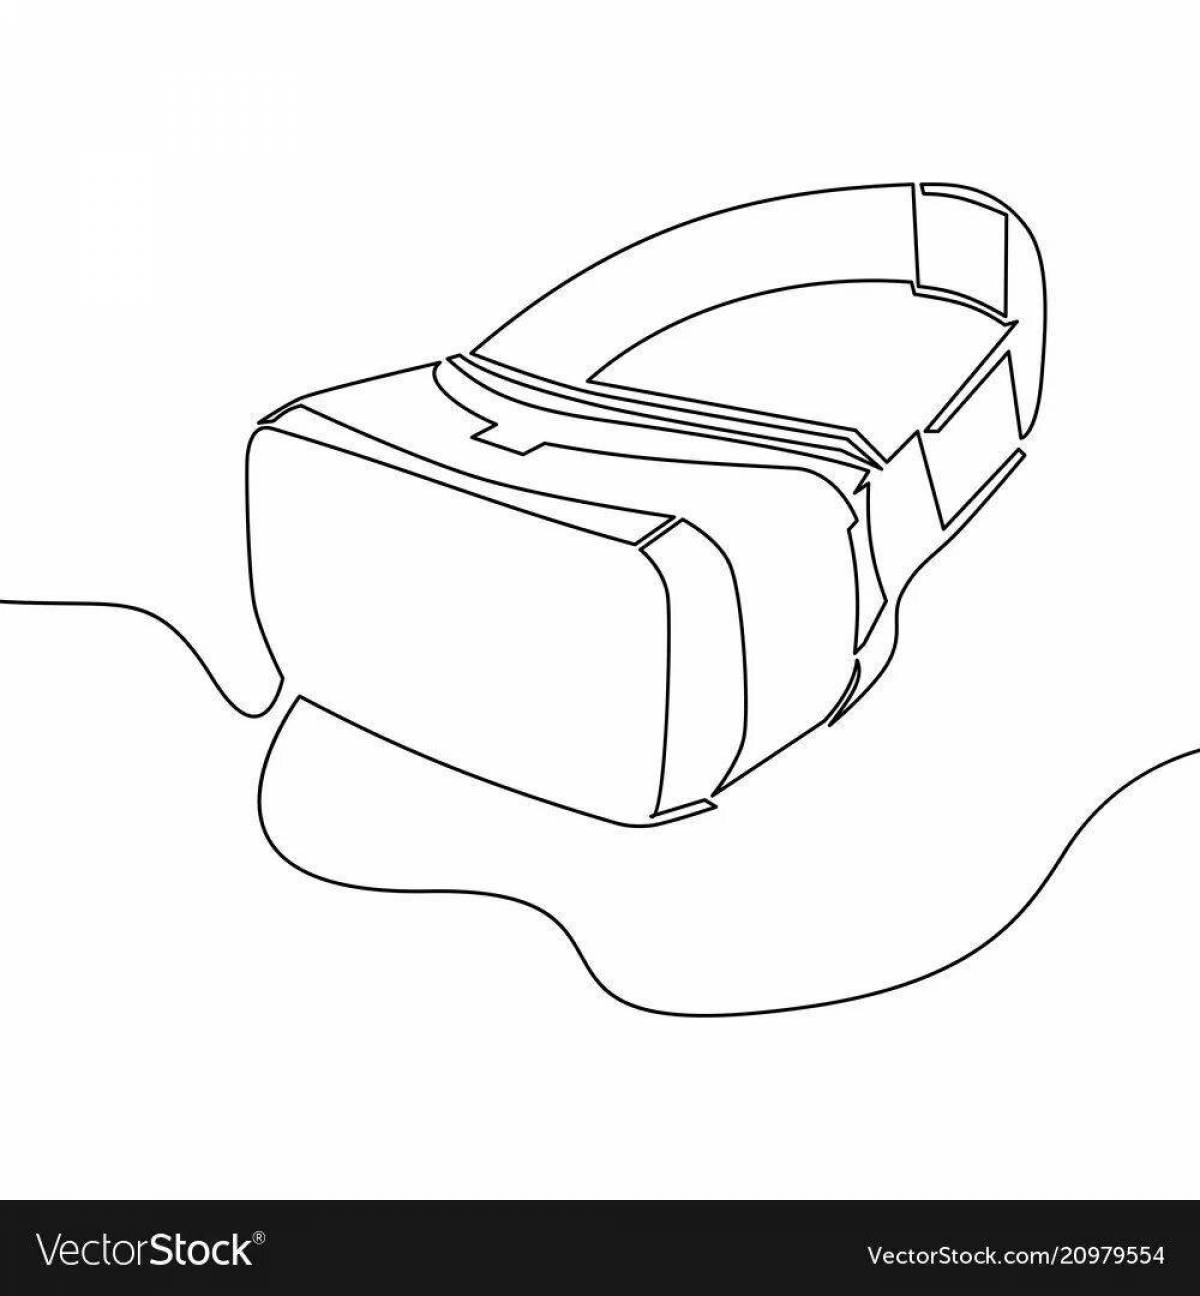 Exciting virtual reality coloring book